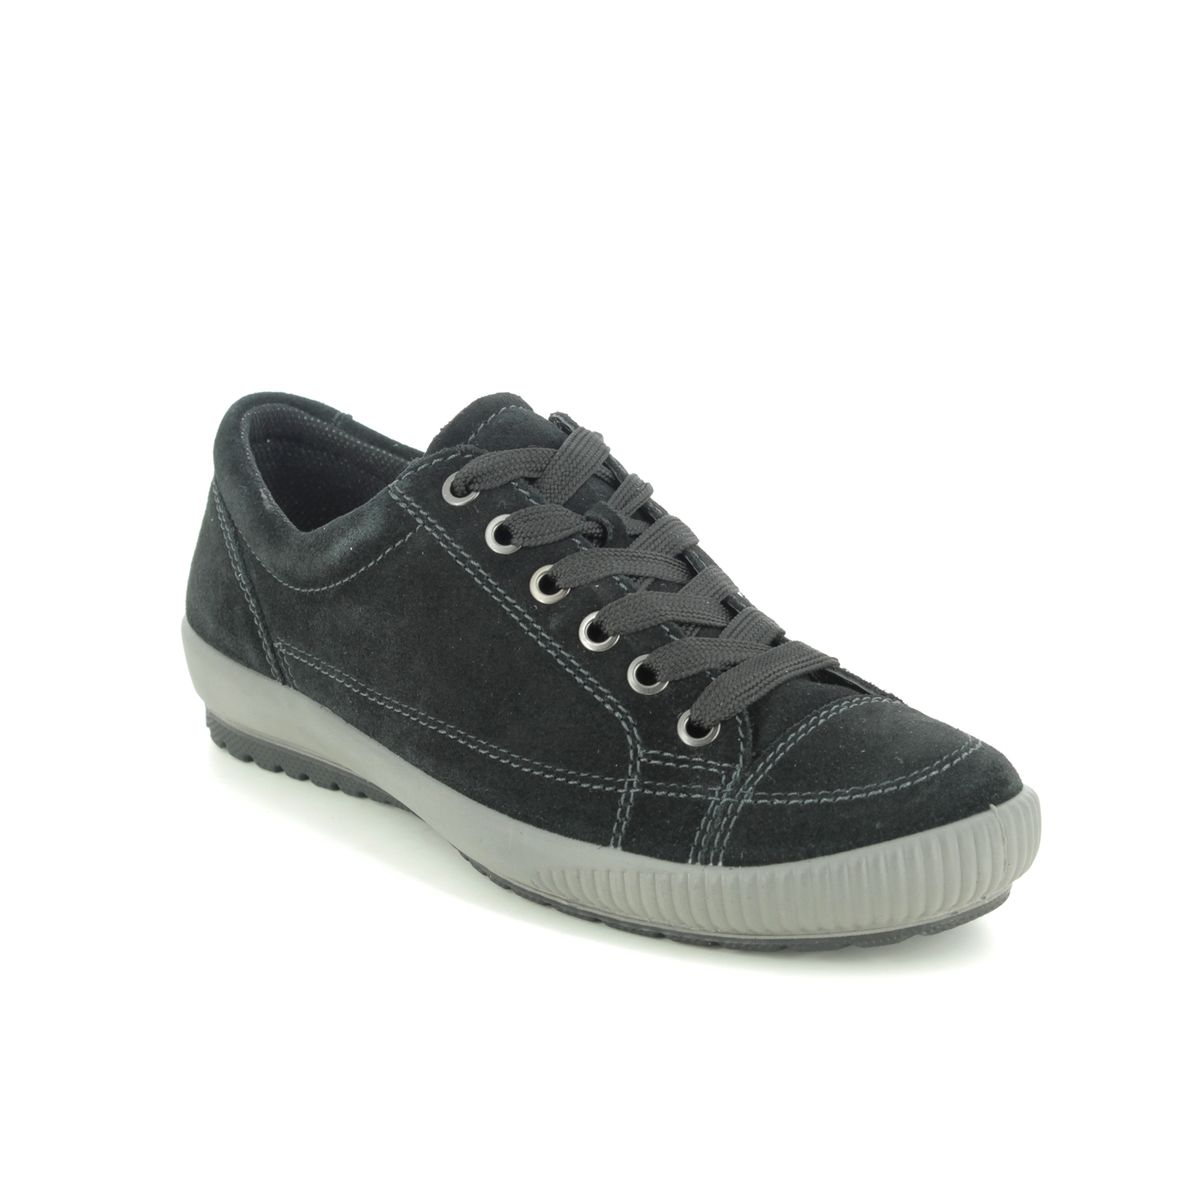 Legero Tanaro Stitch Black Suede Womens Lacing Shoes 0800820-0000 In Size 6.5 In Plain Black Suede